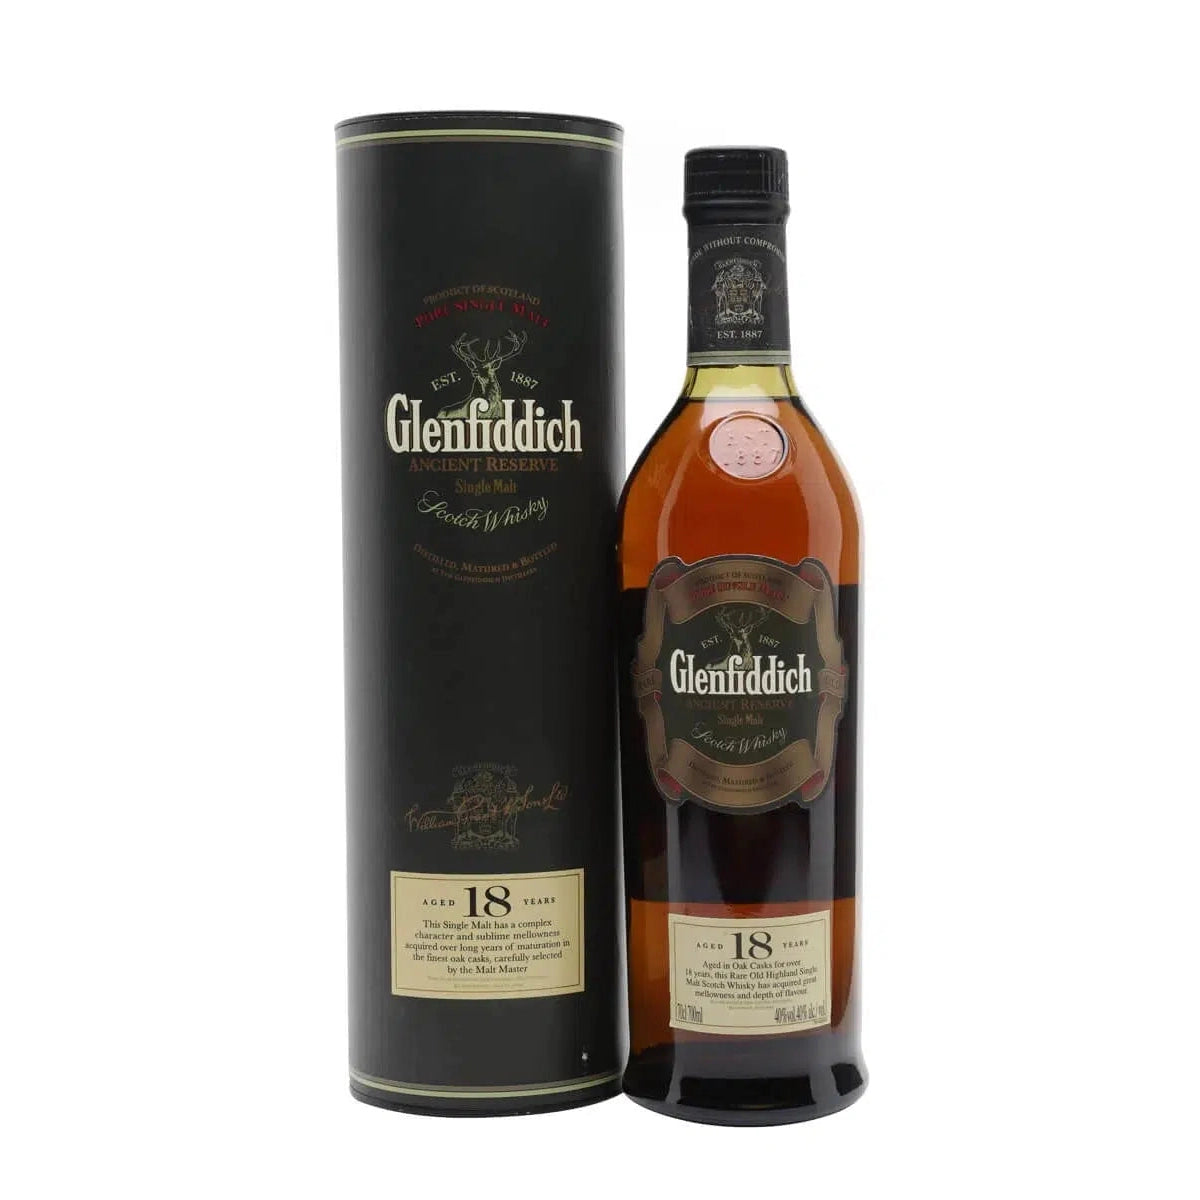 Glenfiddich 18 Year Old Ancient Reserve 700ml